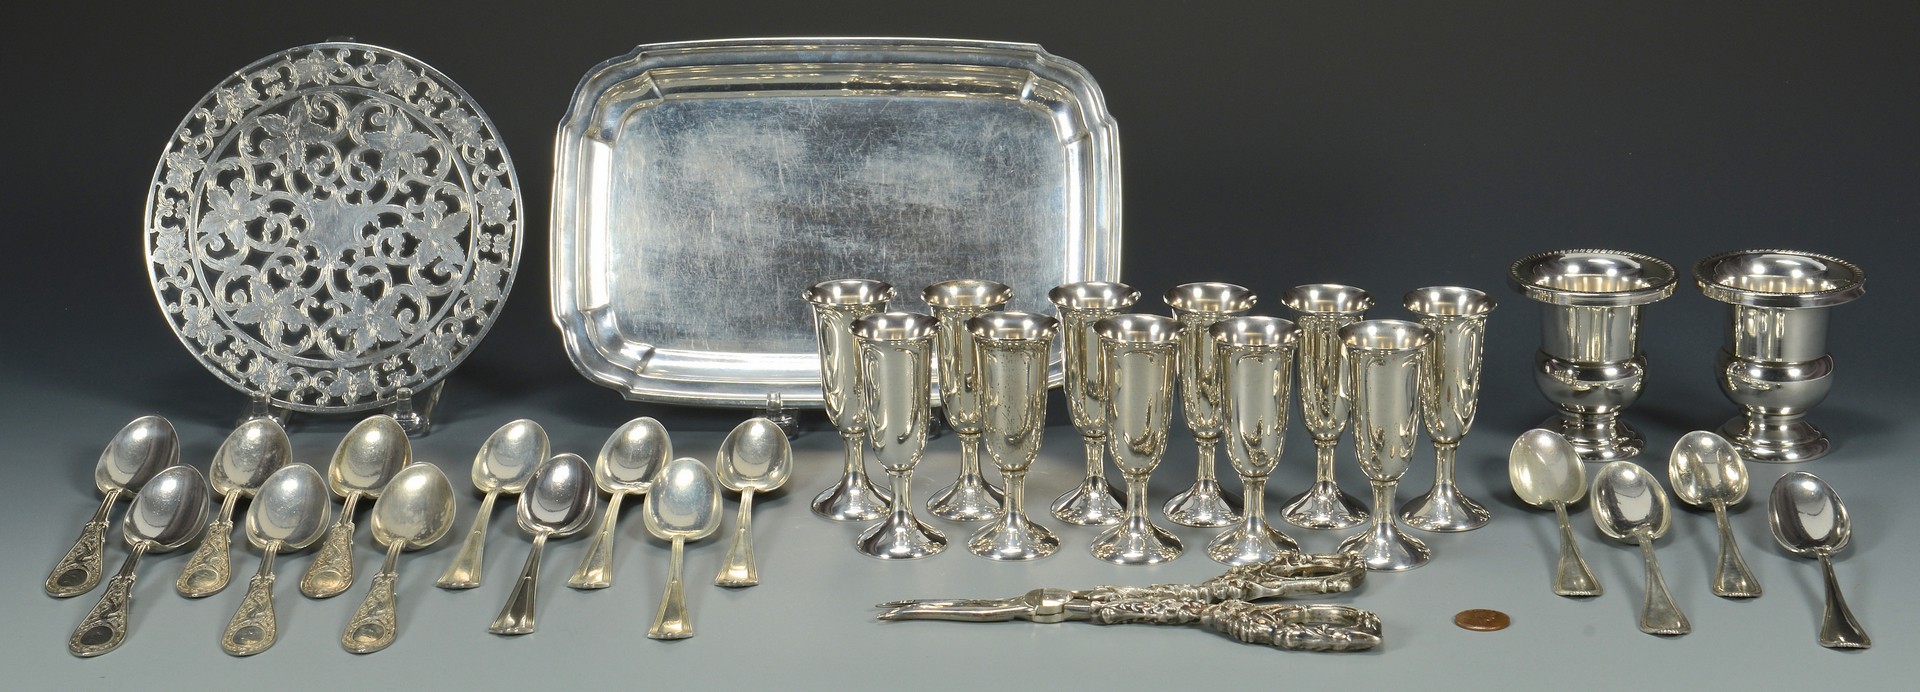 Lot 684: Grouping of Sterling Silver, 31 pcs.